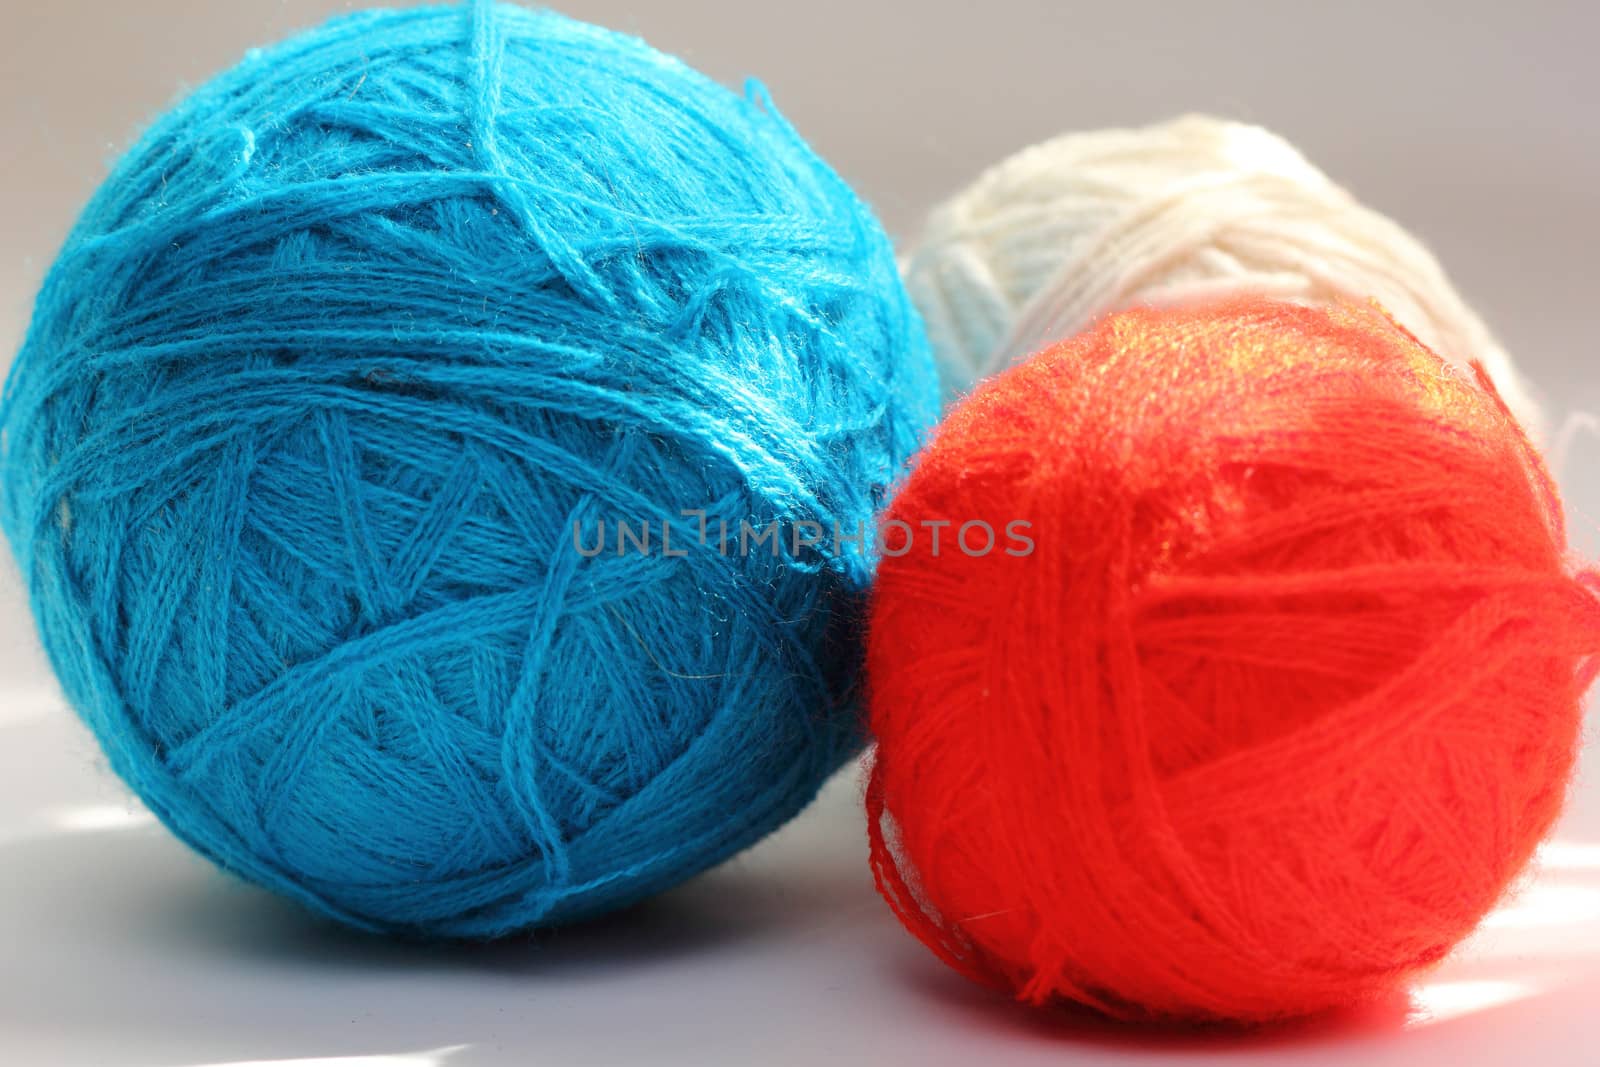 red and blue balls of yarn for needlework